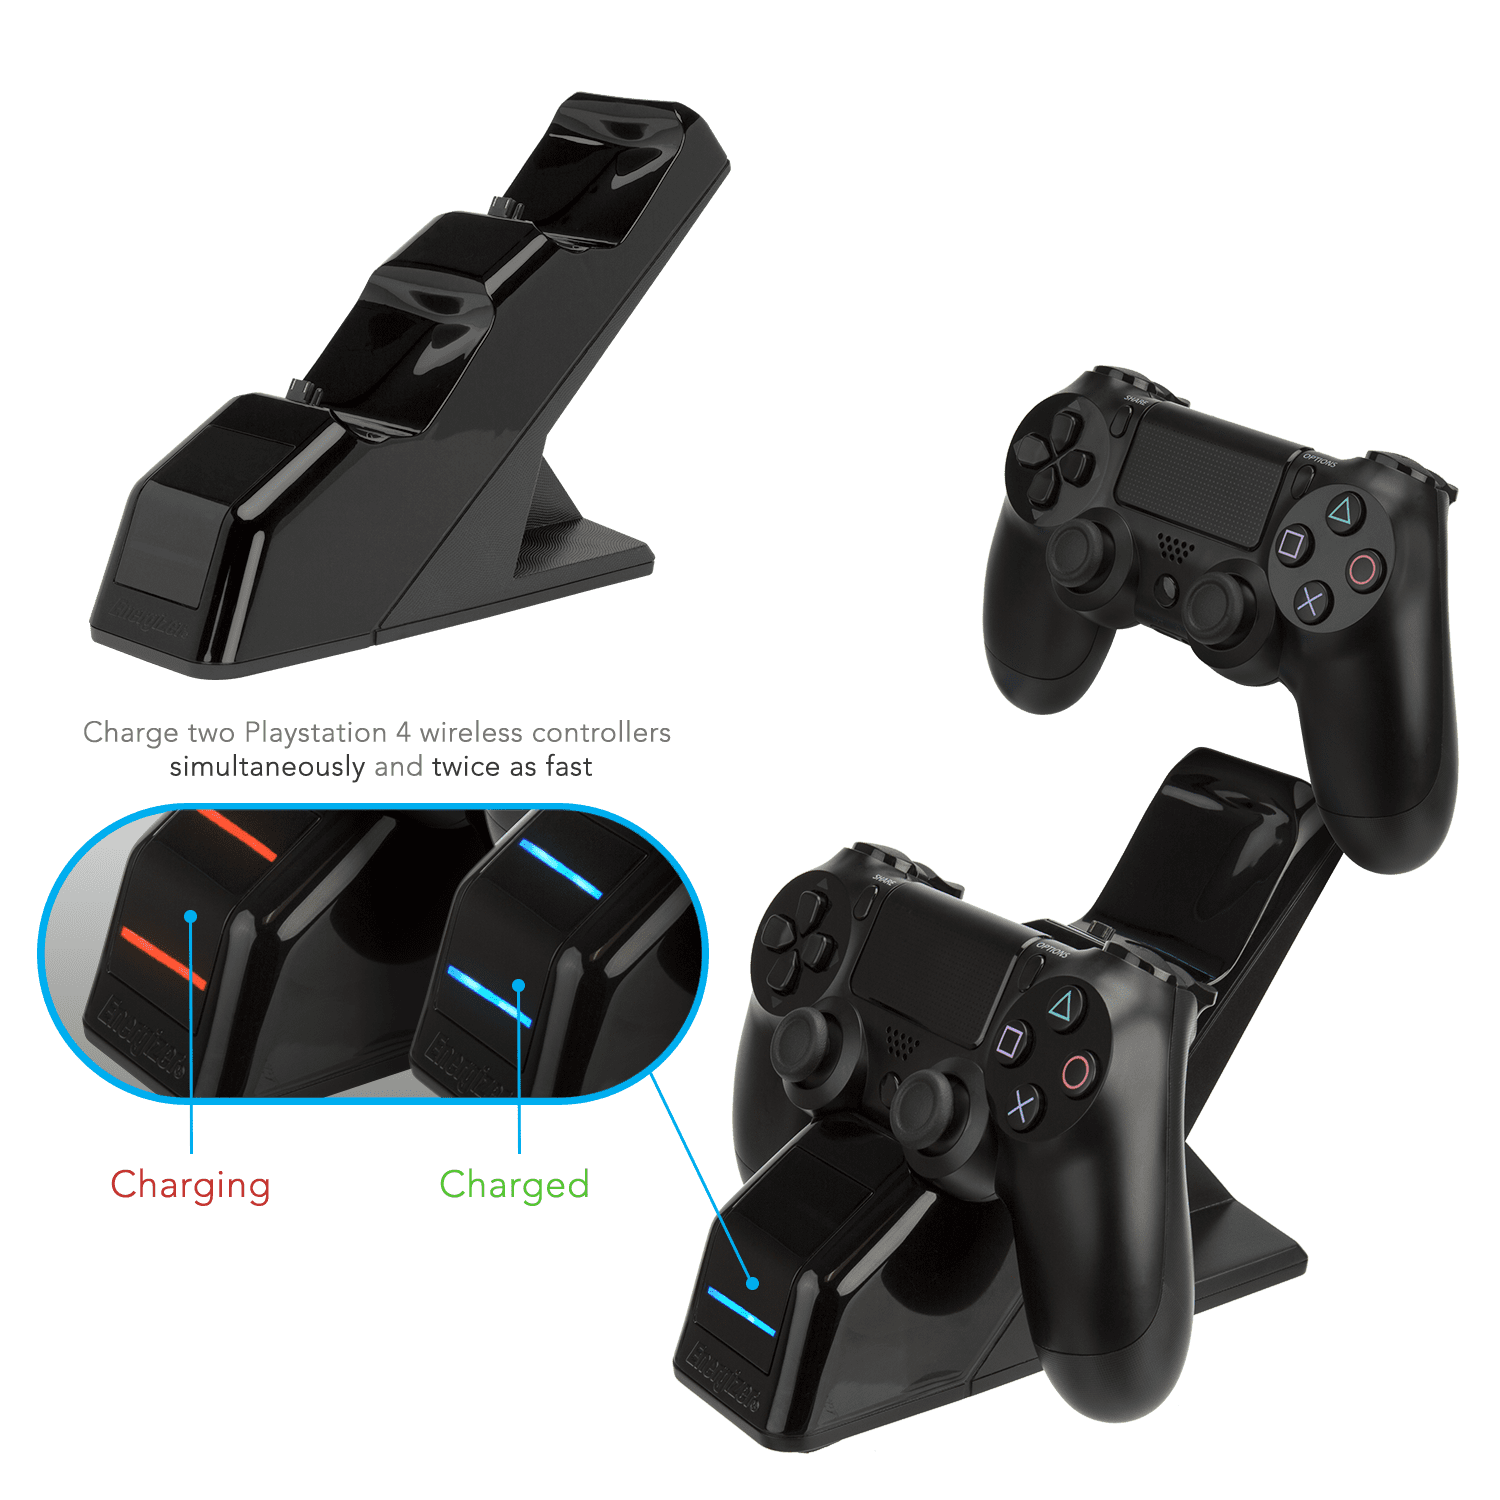 energizer ps4 dual charger